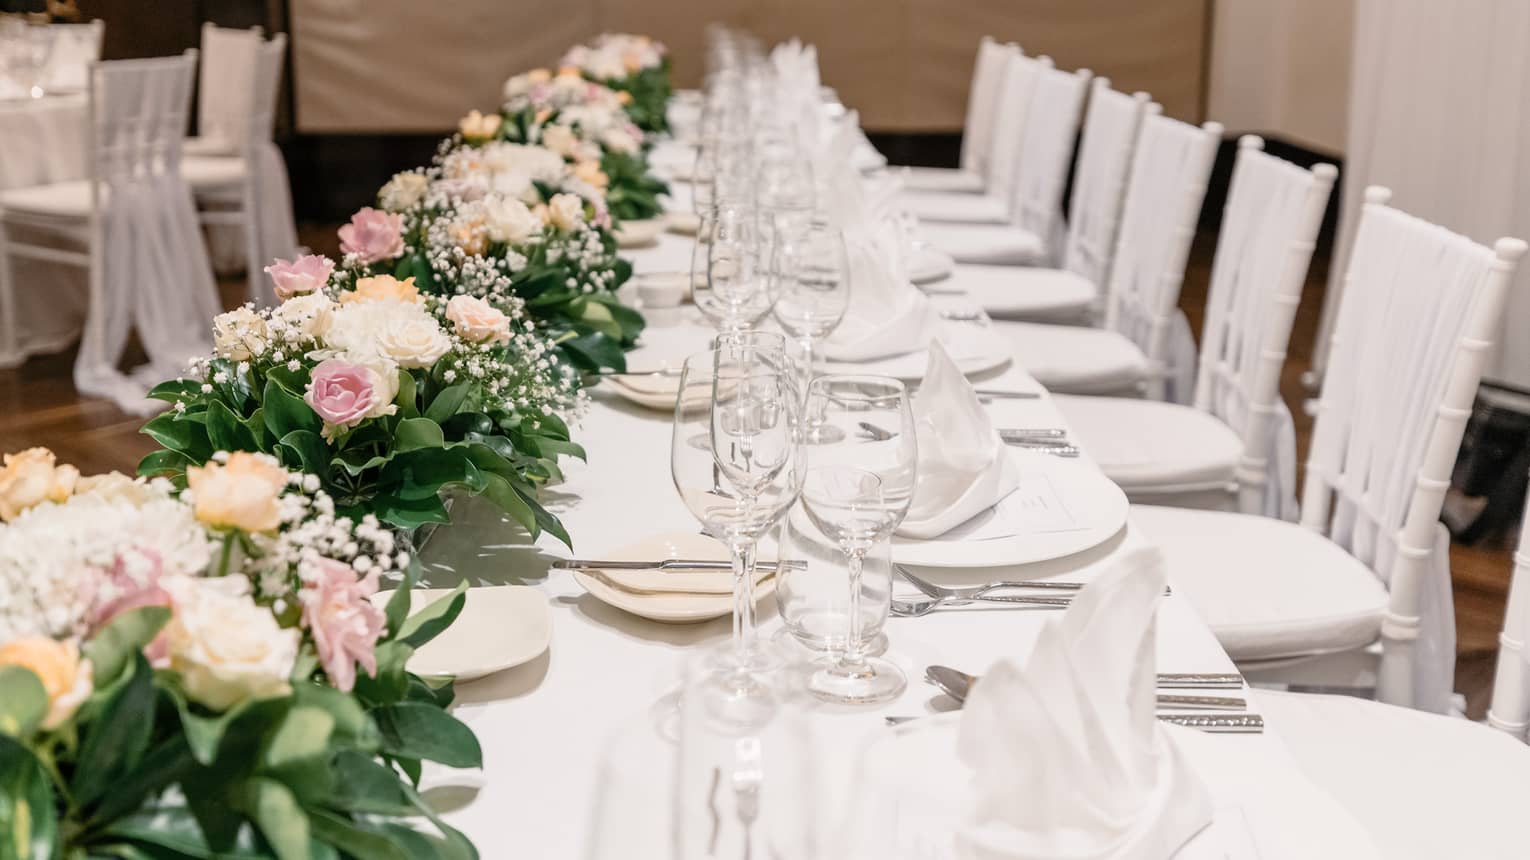 A banquet table is set with a white tablecloth, white porcelain dishes and clear glassware, green, white and pink florals